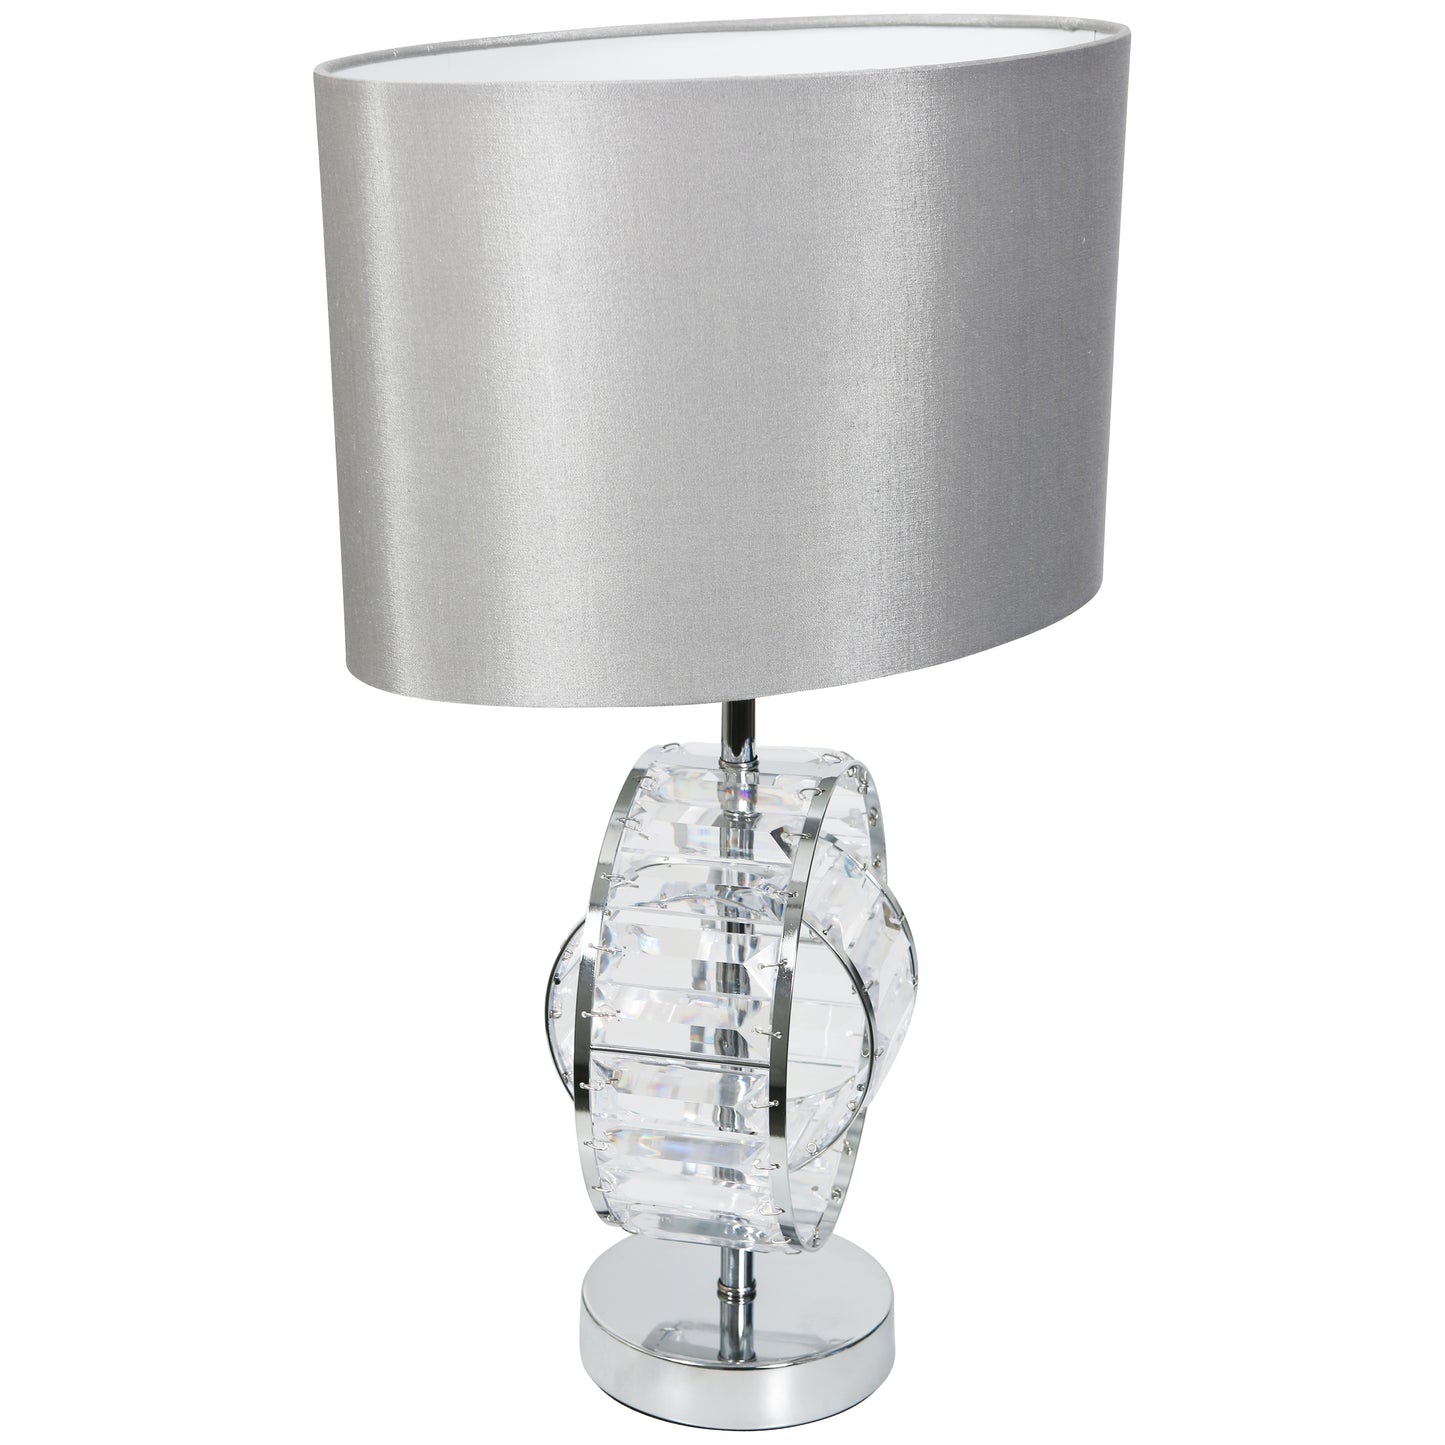 Brompton Chrome Table Lamp with Silver Shade